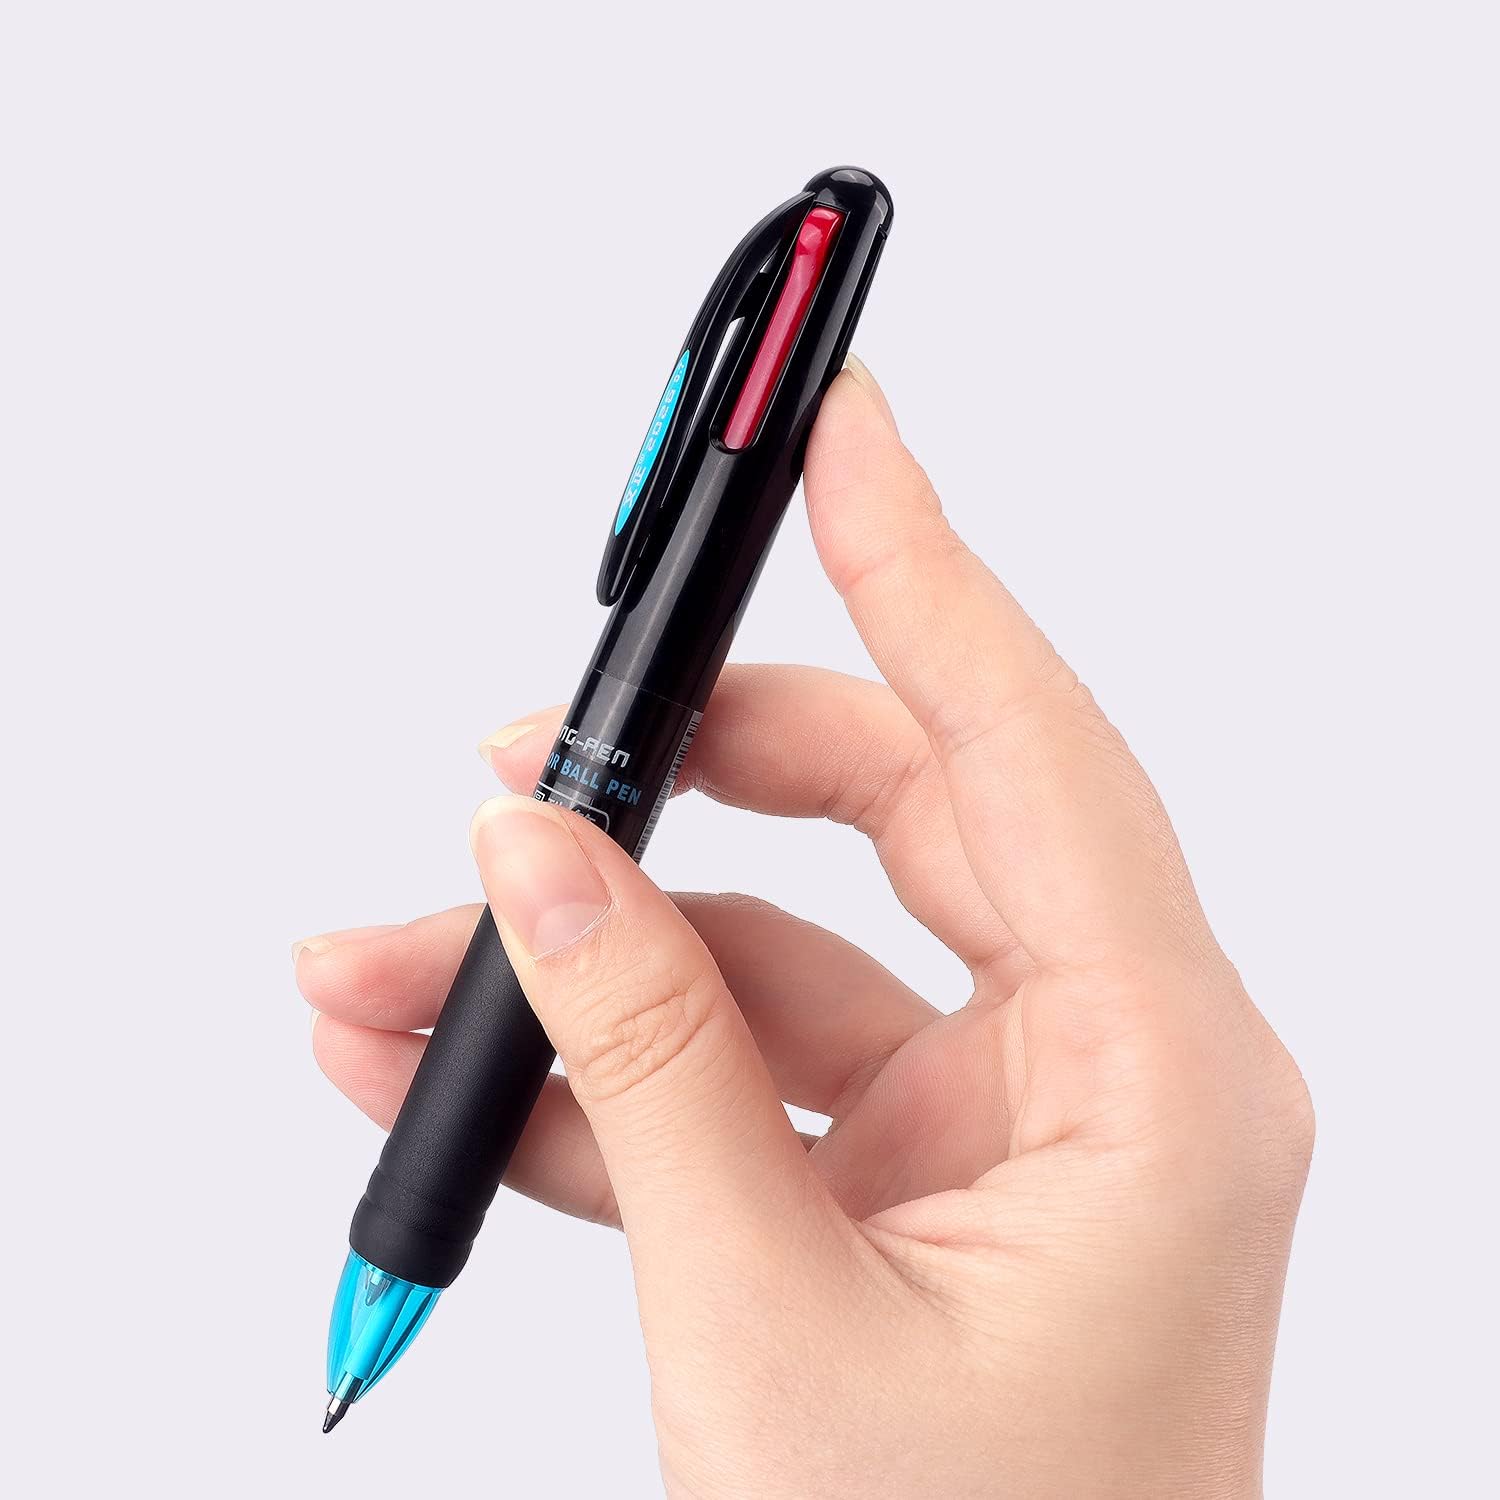 Multicolor Ballpoint Pens 4in1 0.7mm Retractable Gift Pens